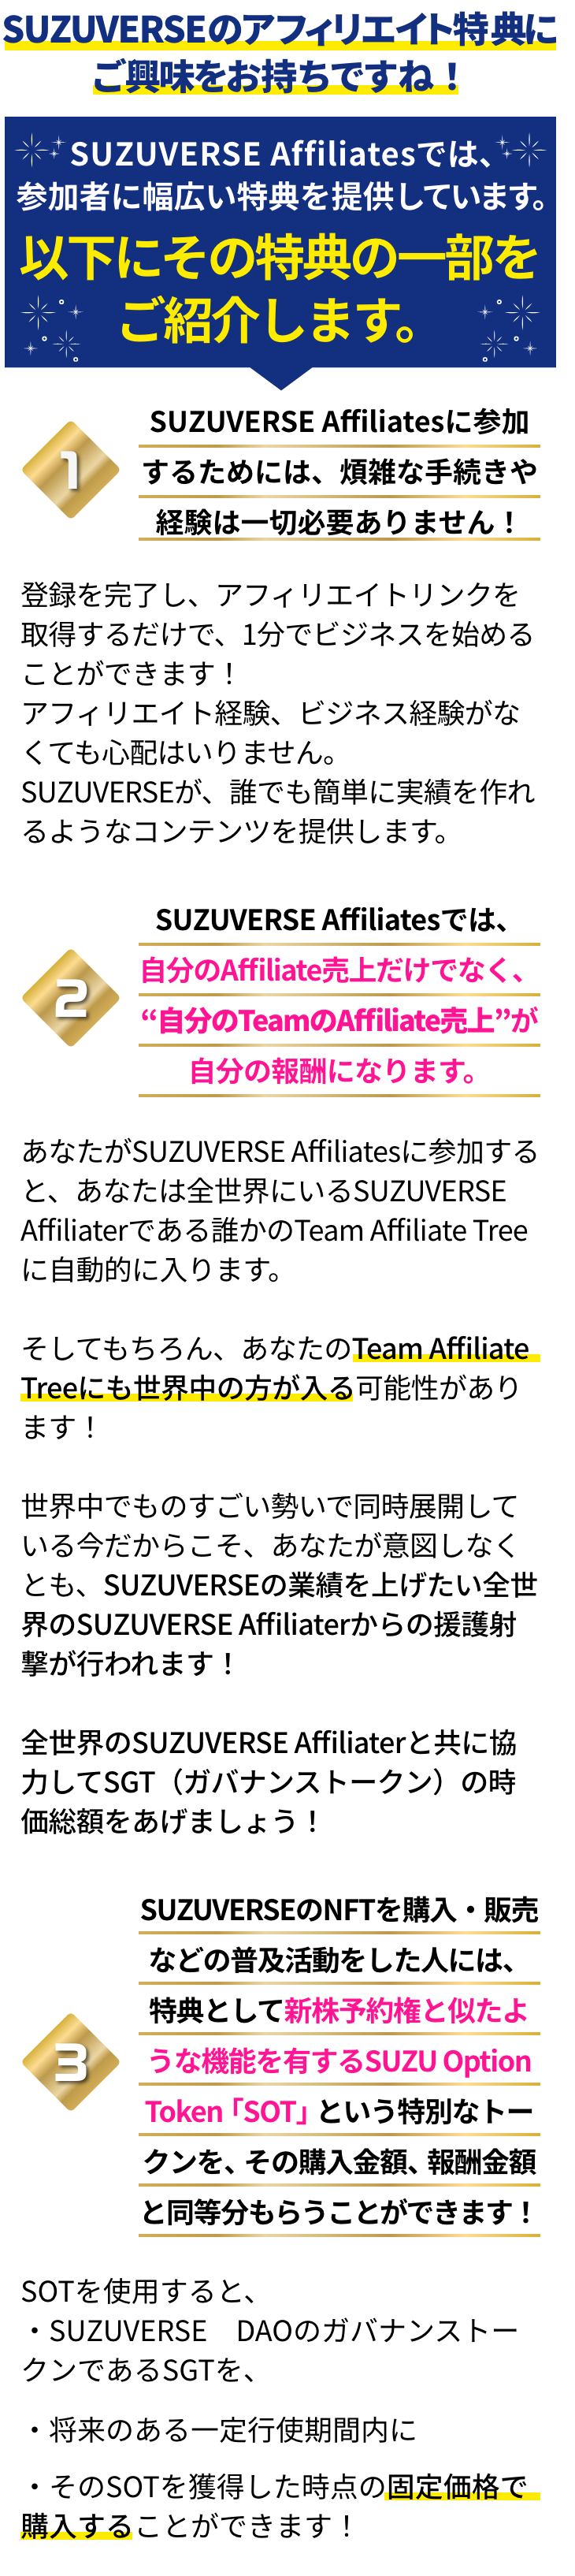 SUZUVERSE Affiliatesの特典の一部をご紹介します